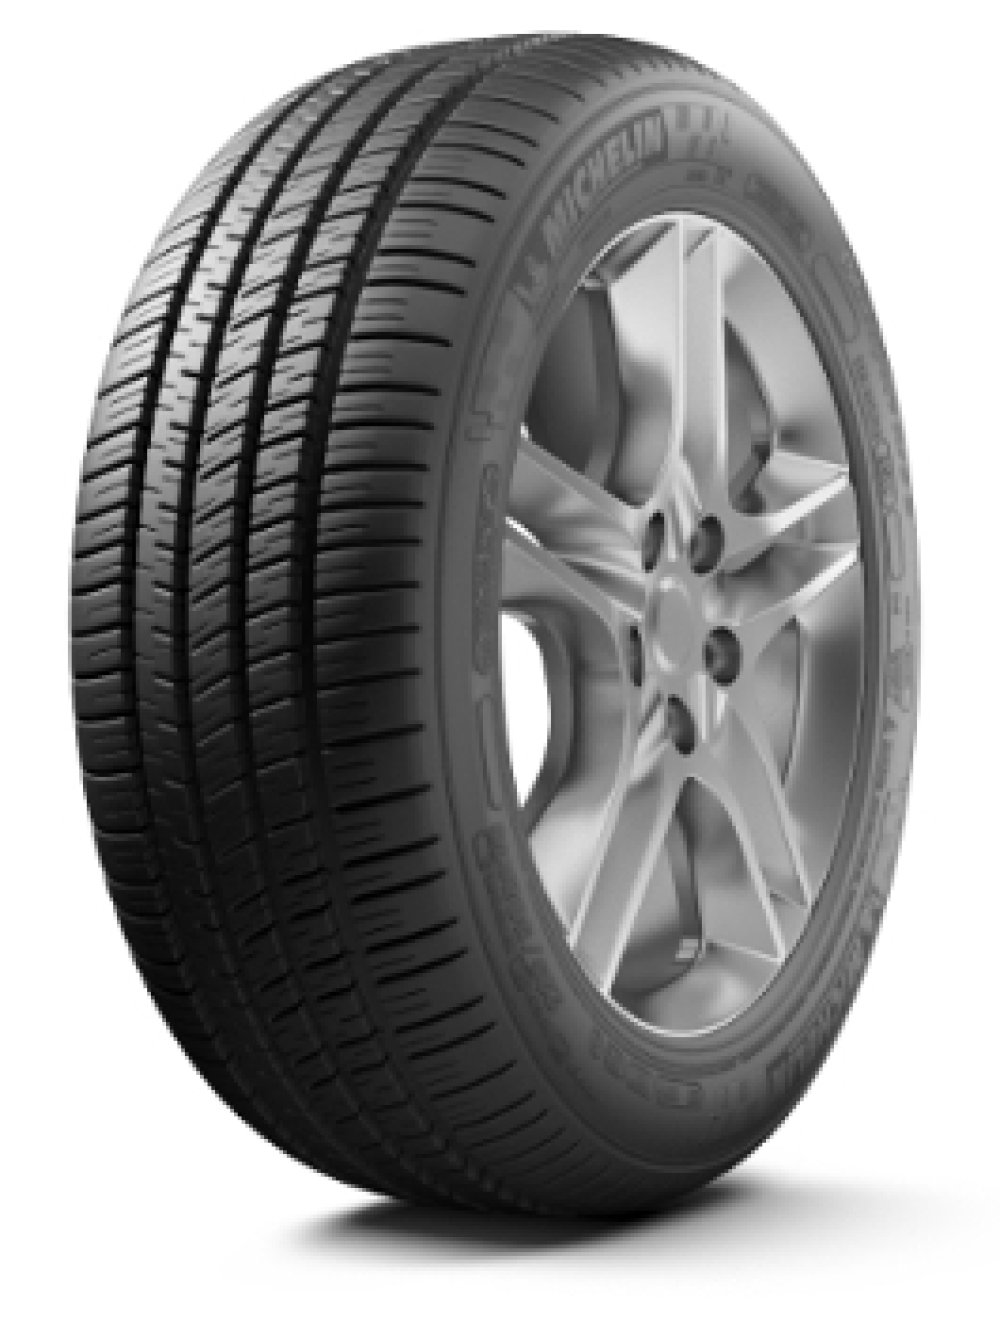 Image of Michelin Pilot Sport A/S 3 ( 275/45 R20 110V XL, N0 )